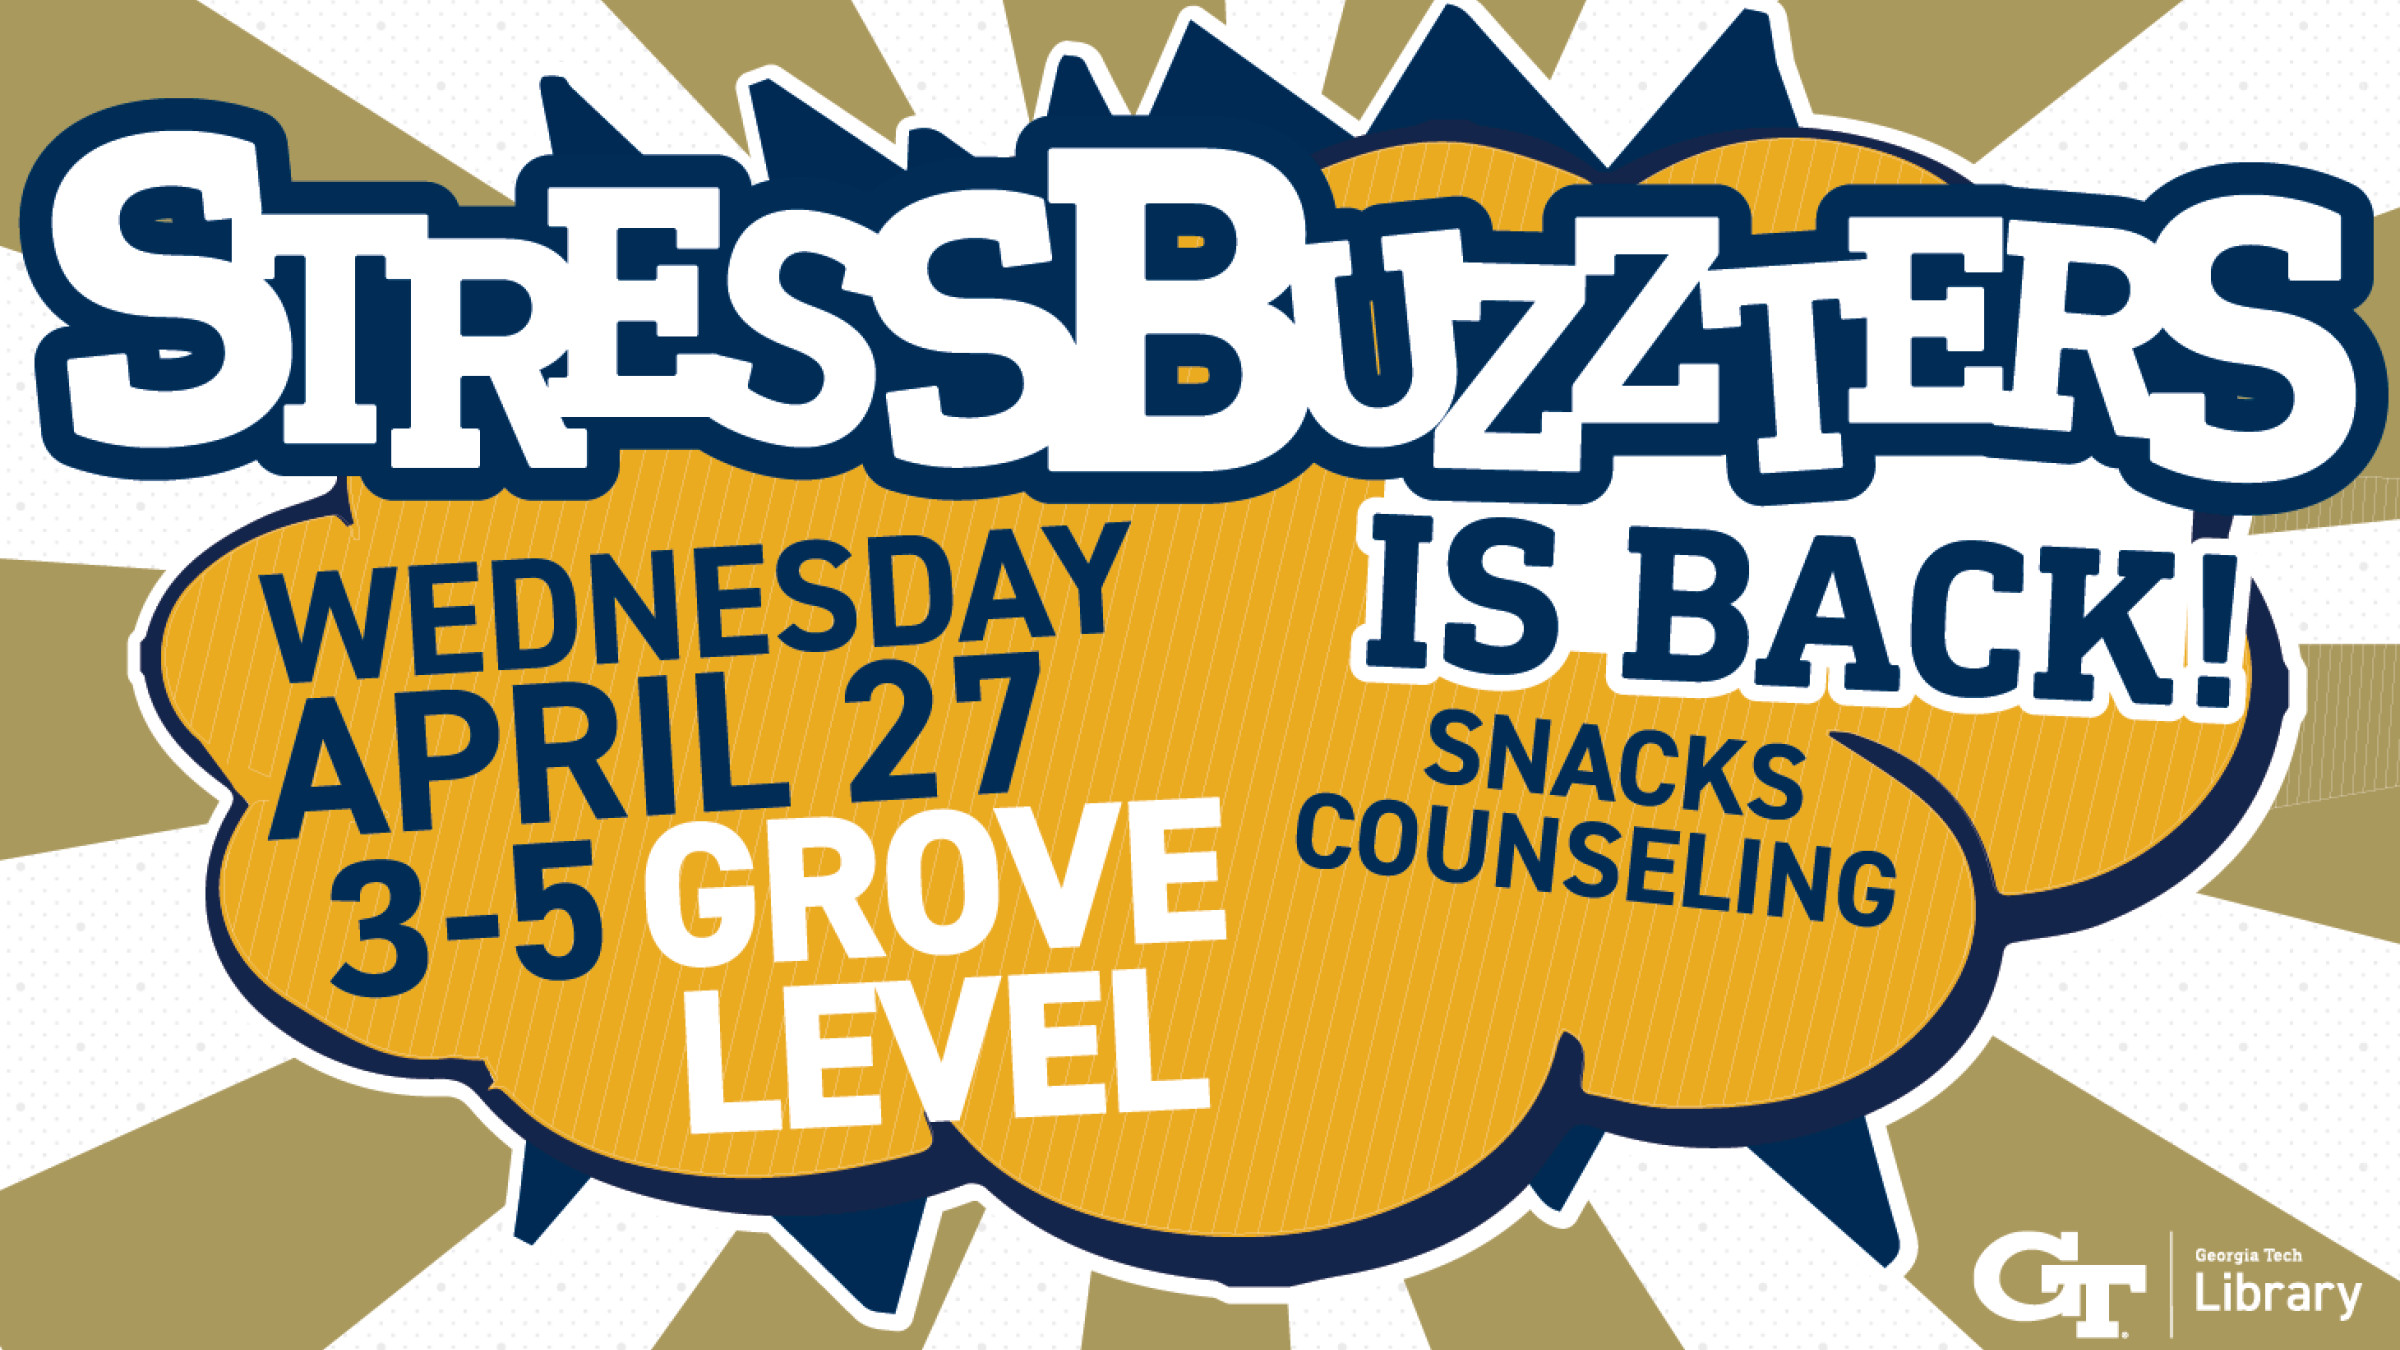 StressBuzzters at the Library